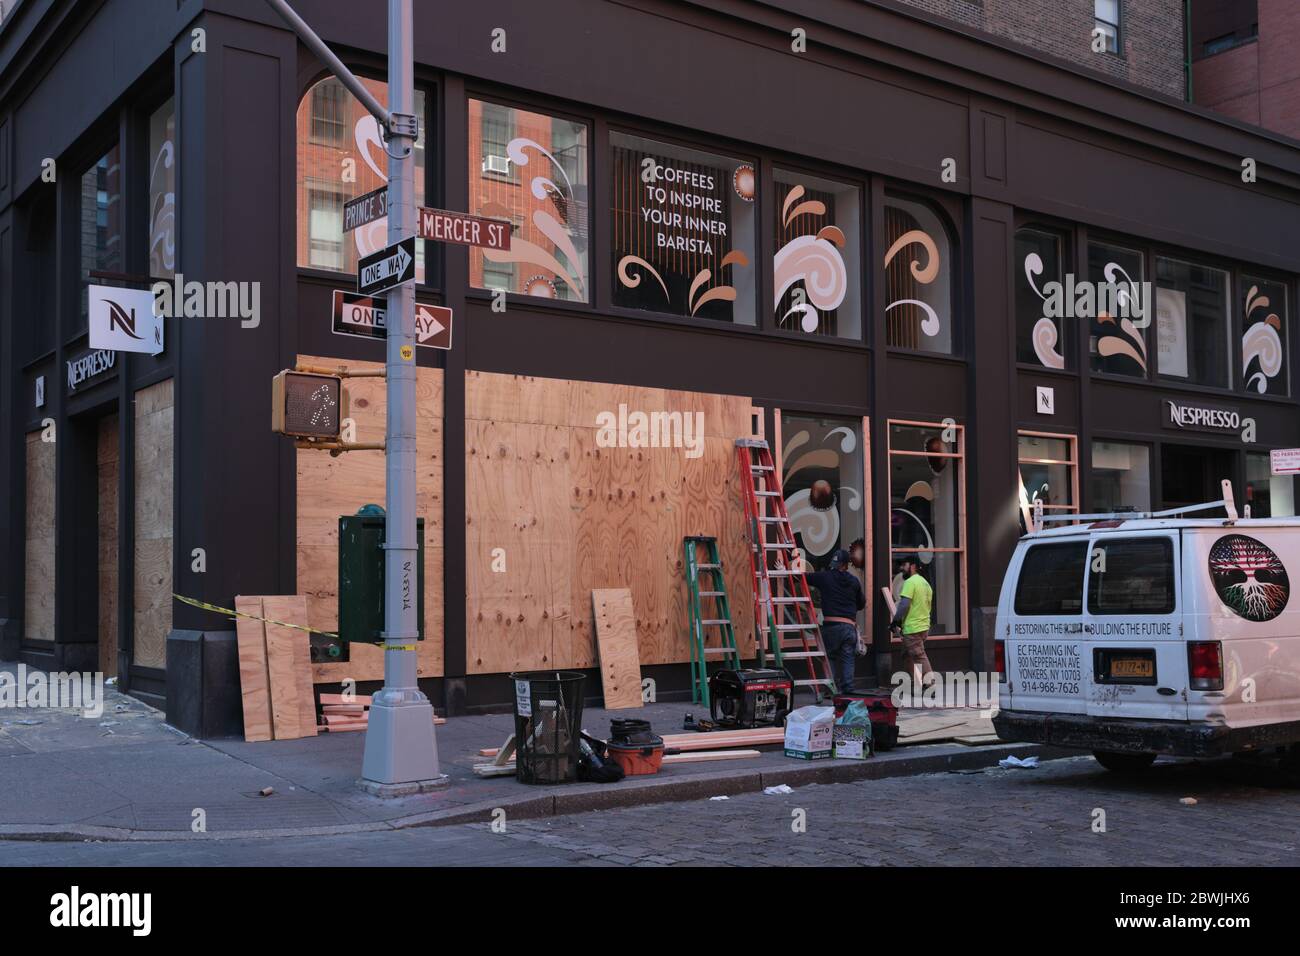 New York, NY, USA - June 1, 2020: Workers board up the Nespresso coffee shop windows on Prince Street in New York City of looting Stock Photo Alamy